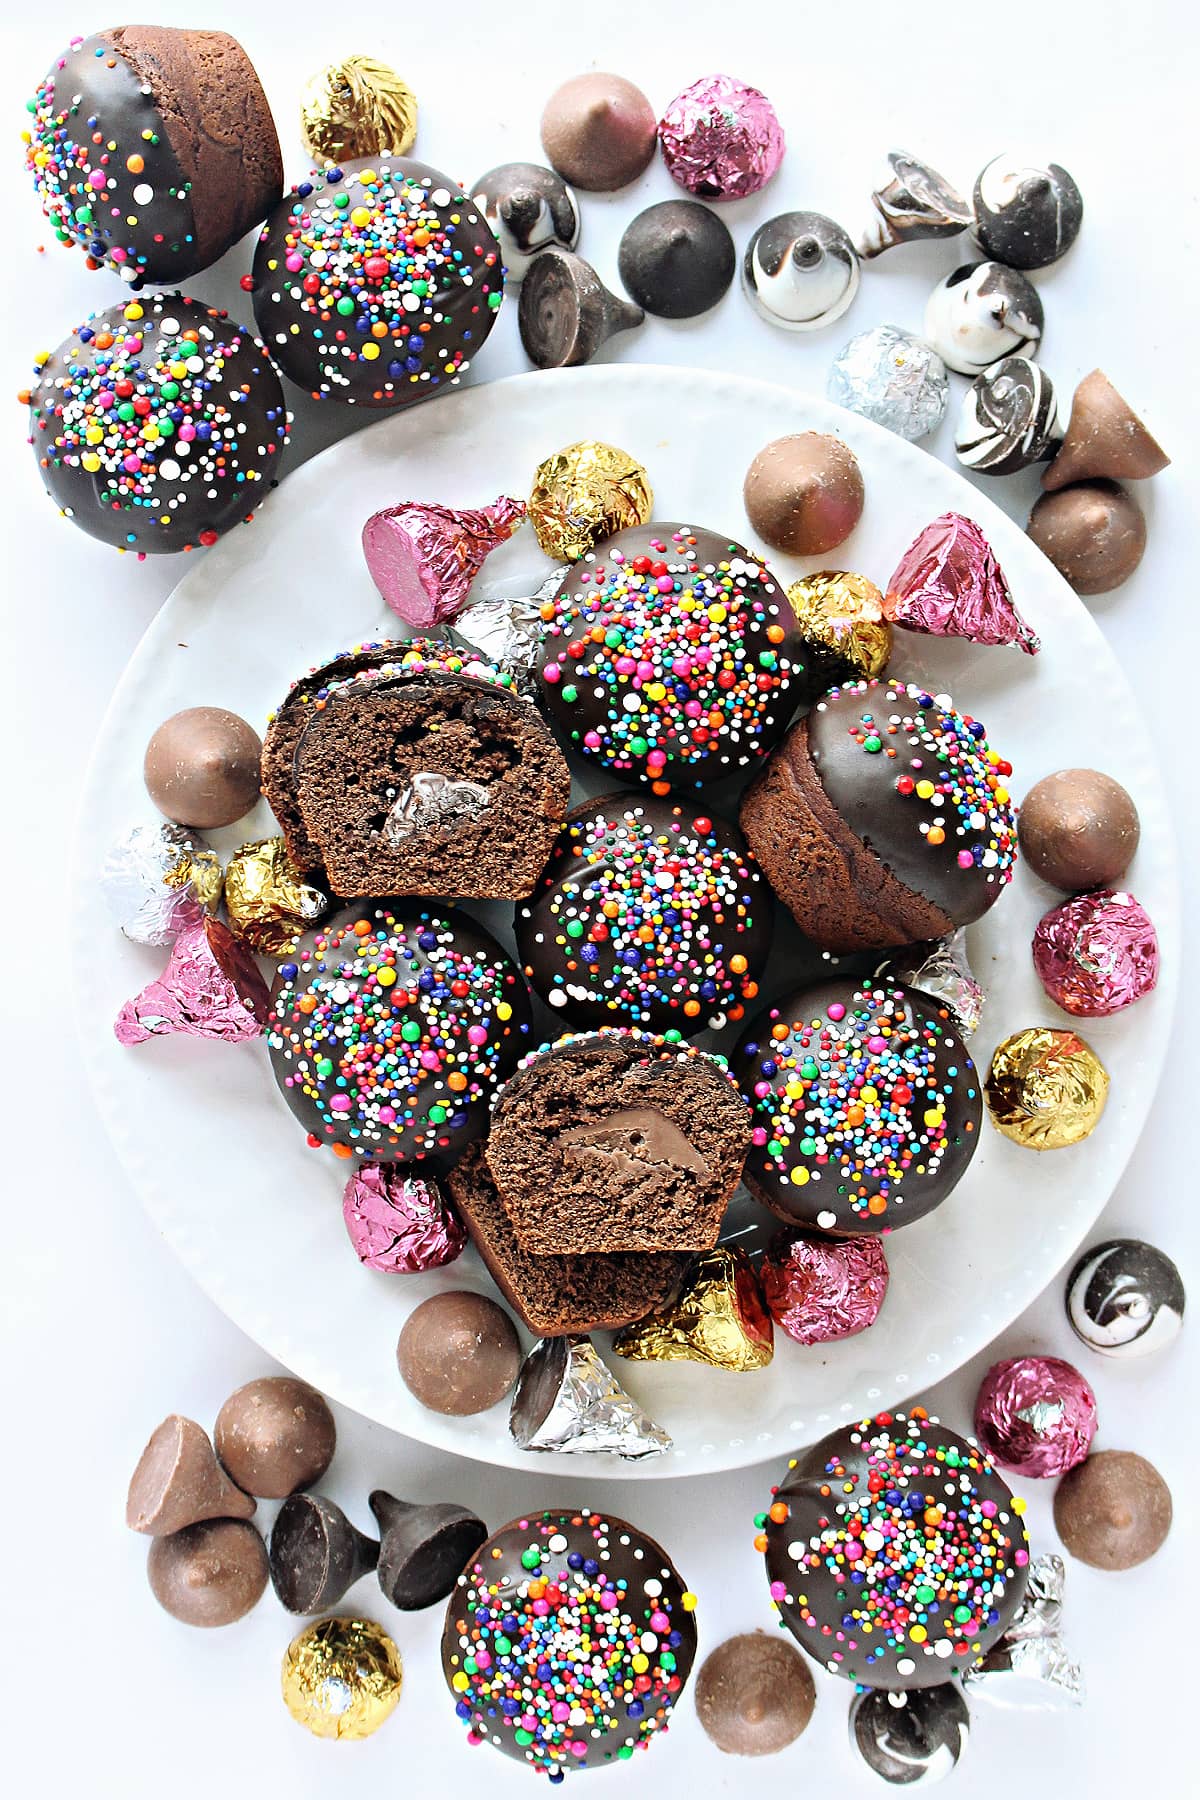 Chocolate kisses and ball shaped Secret Kiss Cookies dipped in chocolate with multicolored nonpareils. 